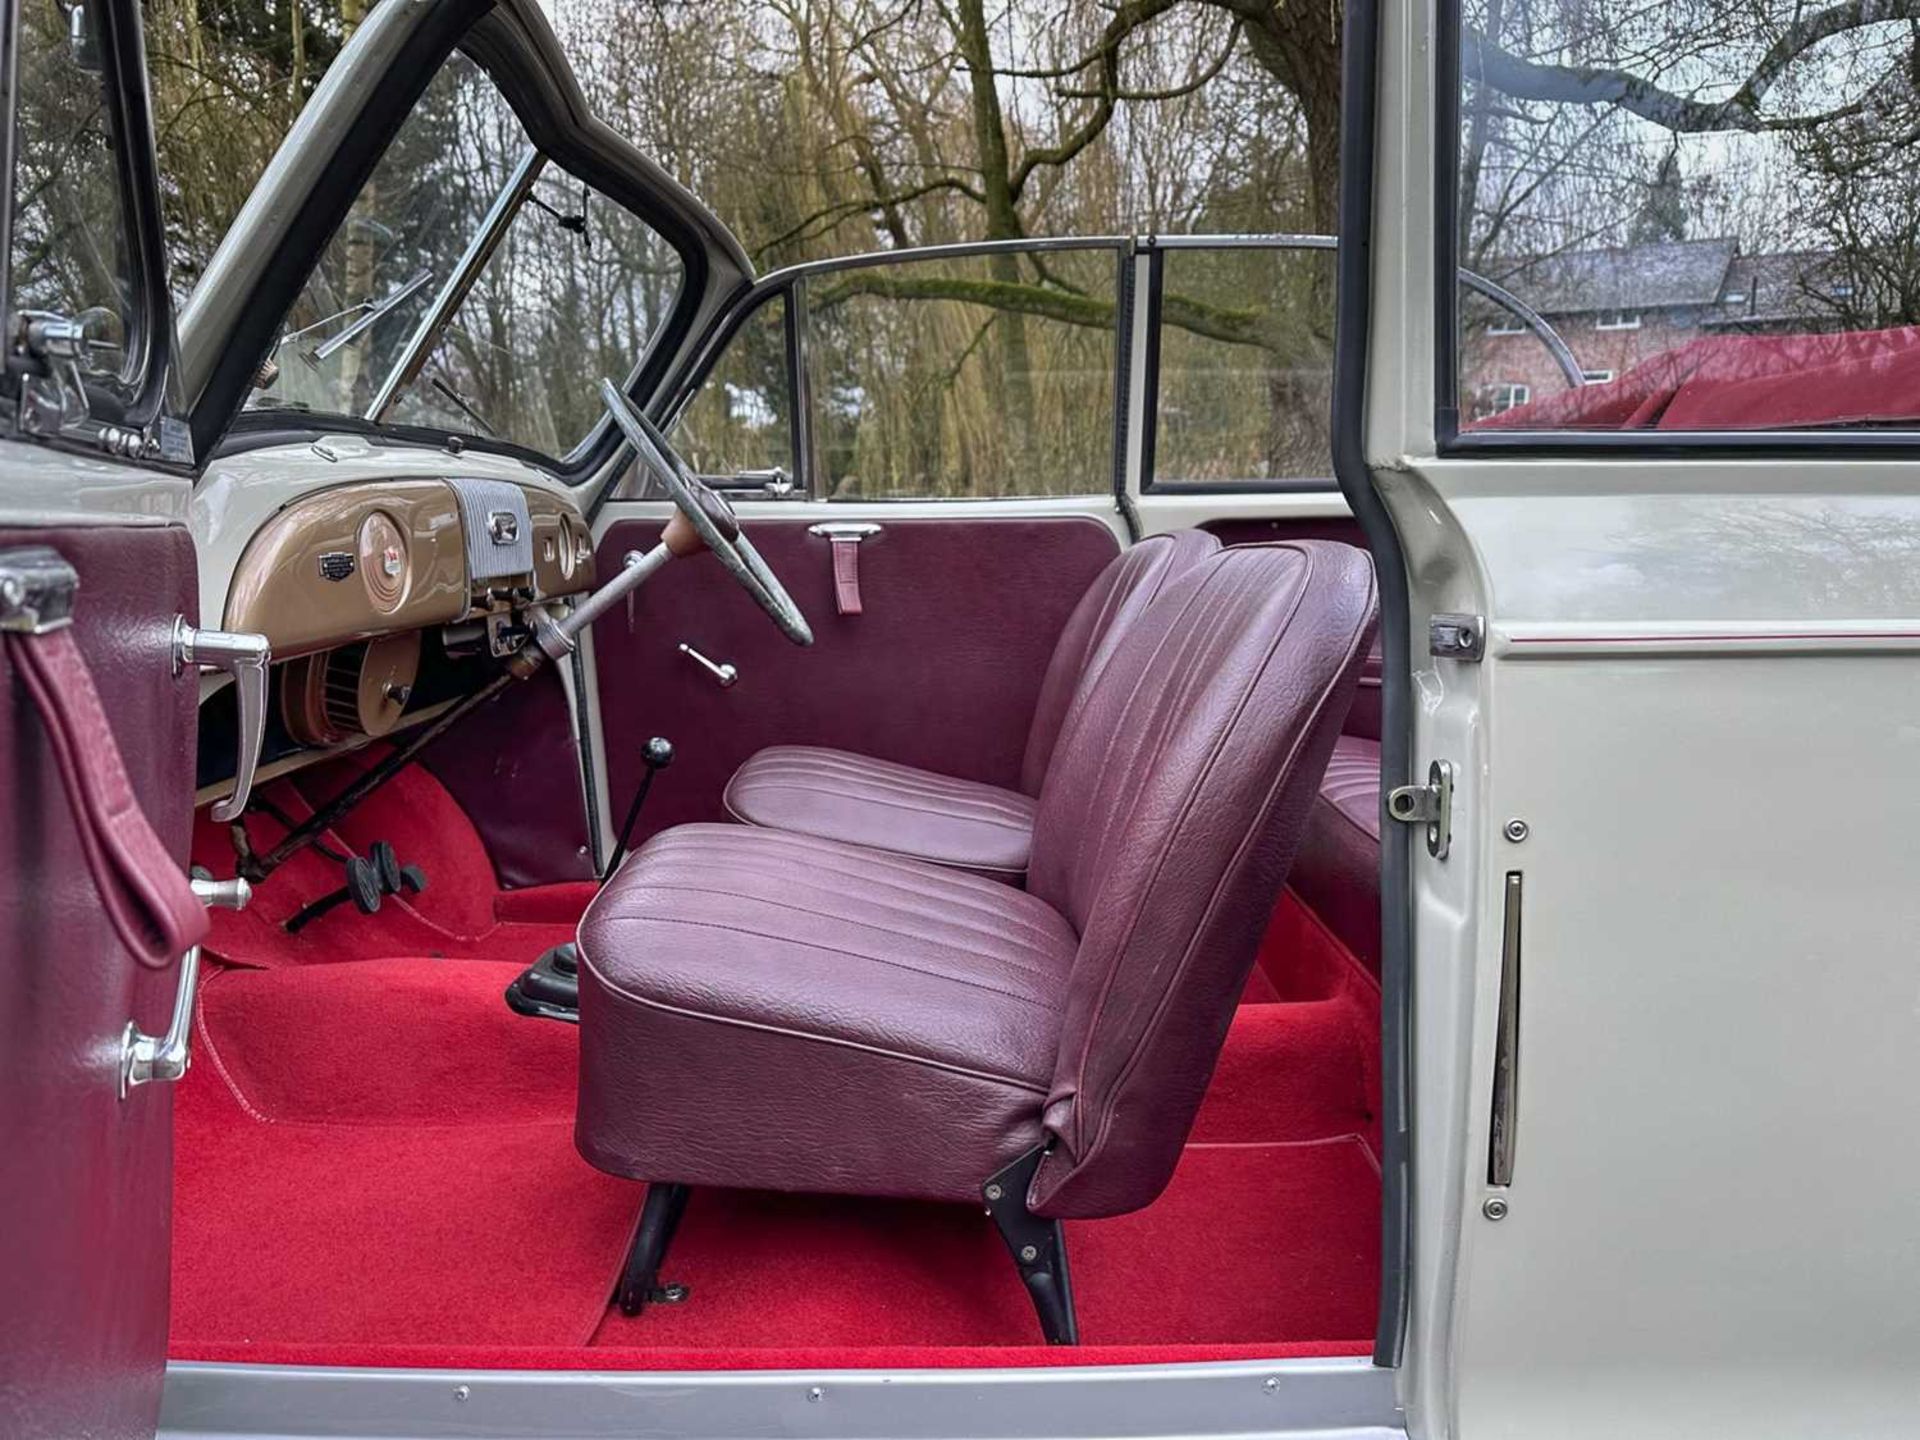 1954 Morris Minor Tourer Fully restored to concours standard - Image 46 of 100